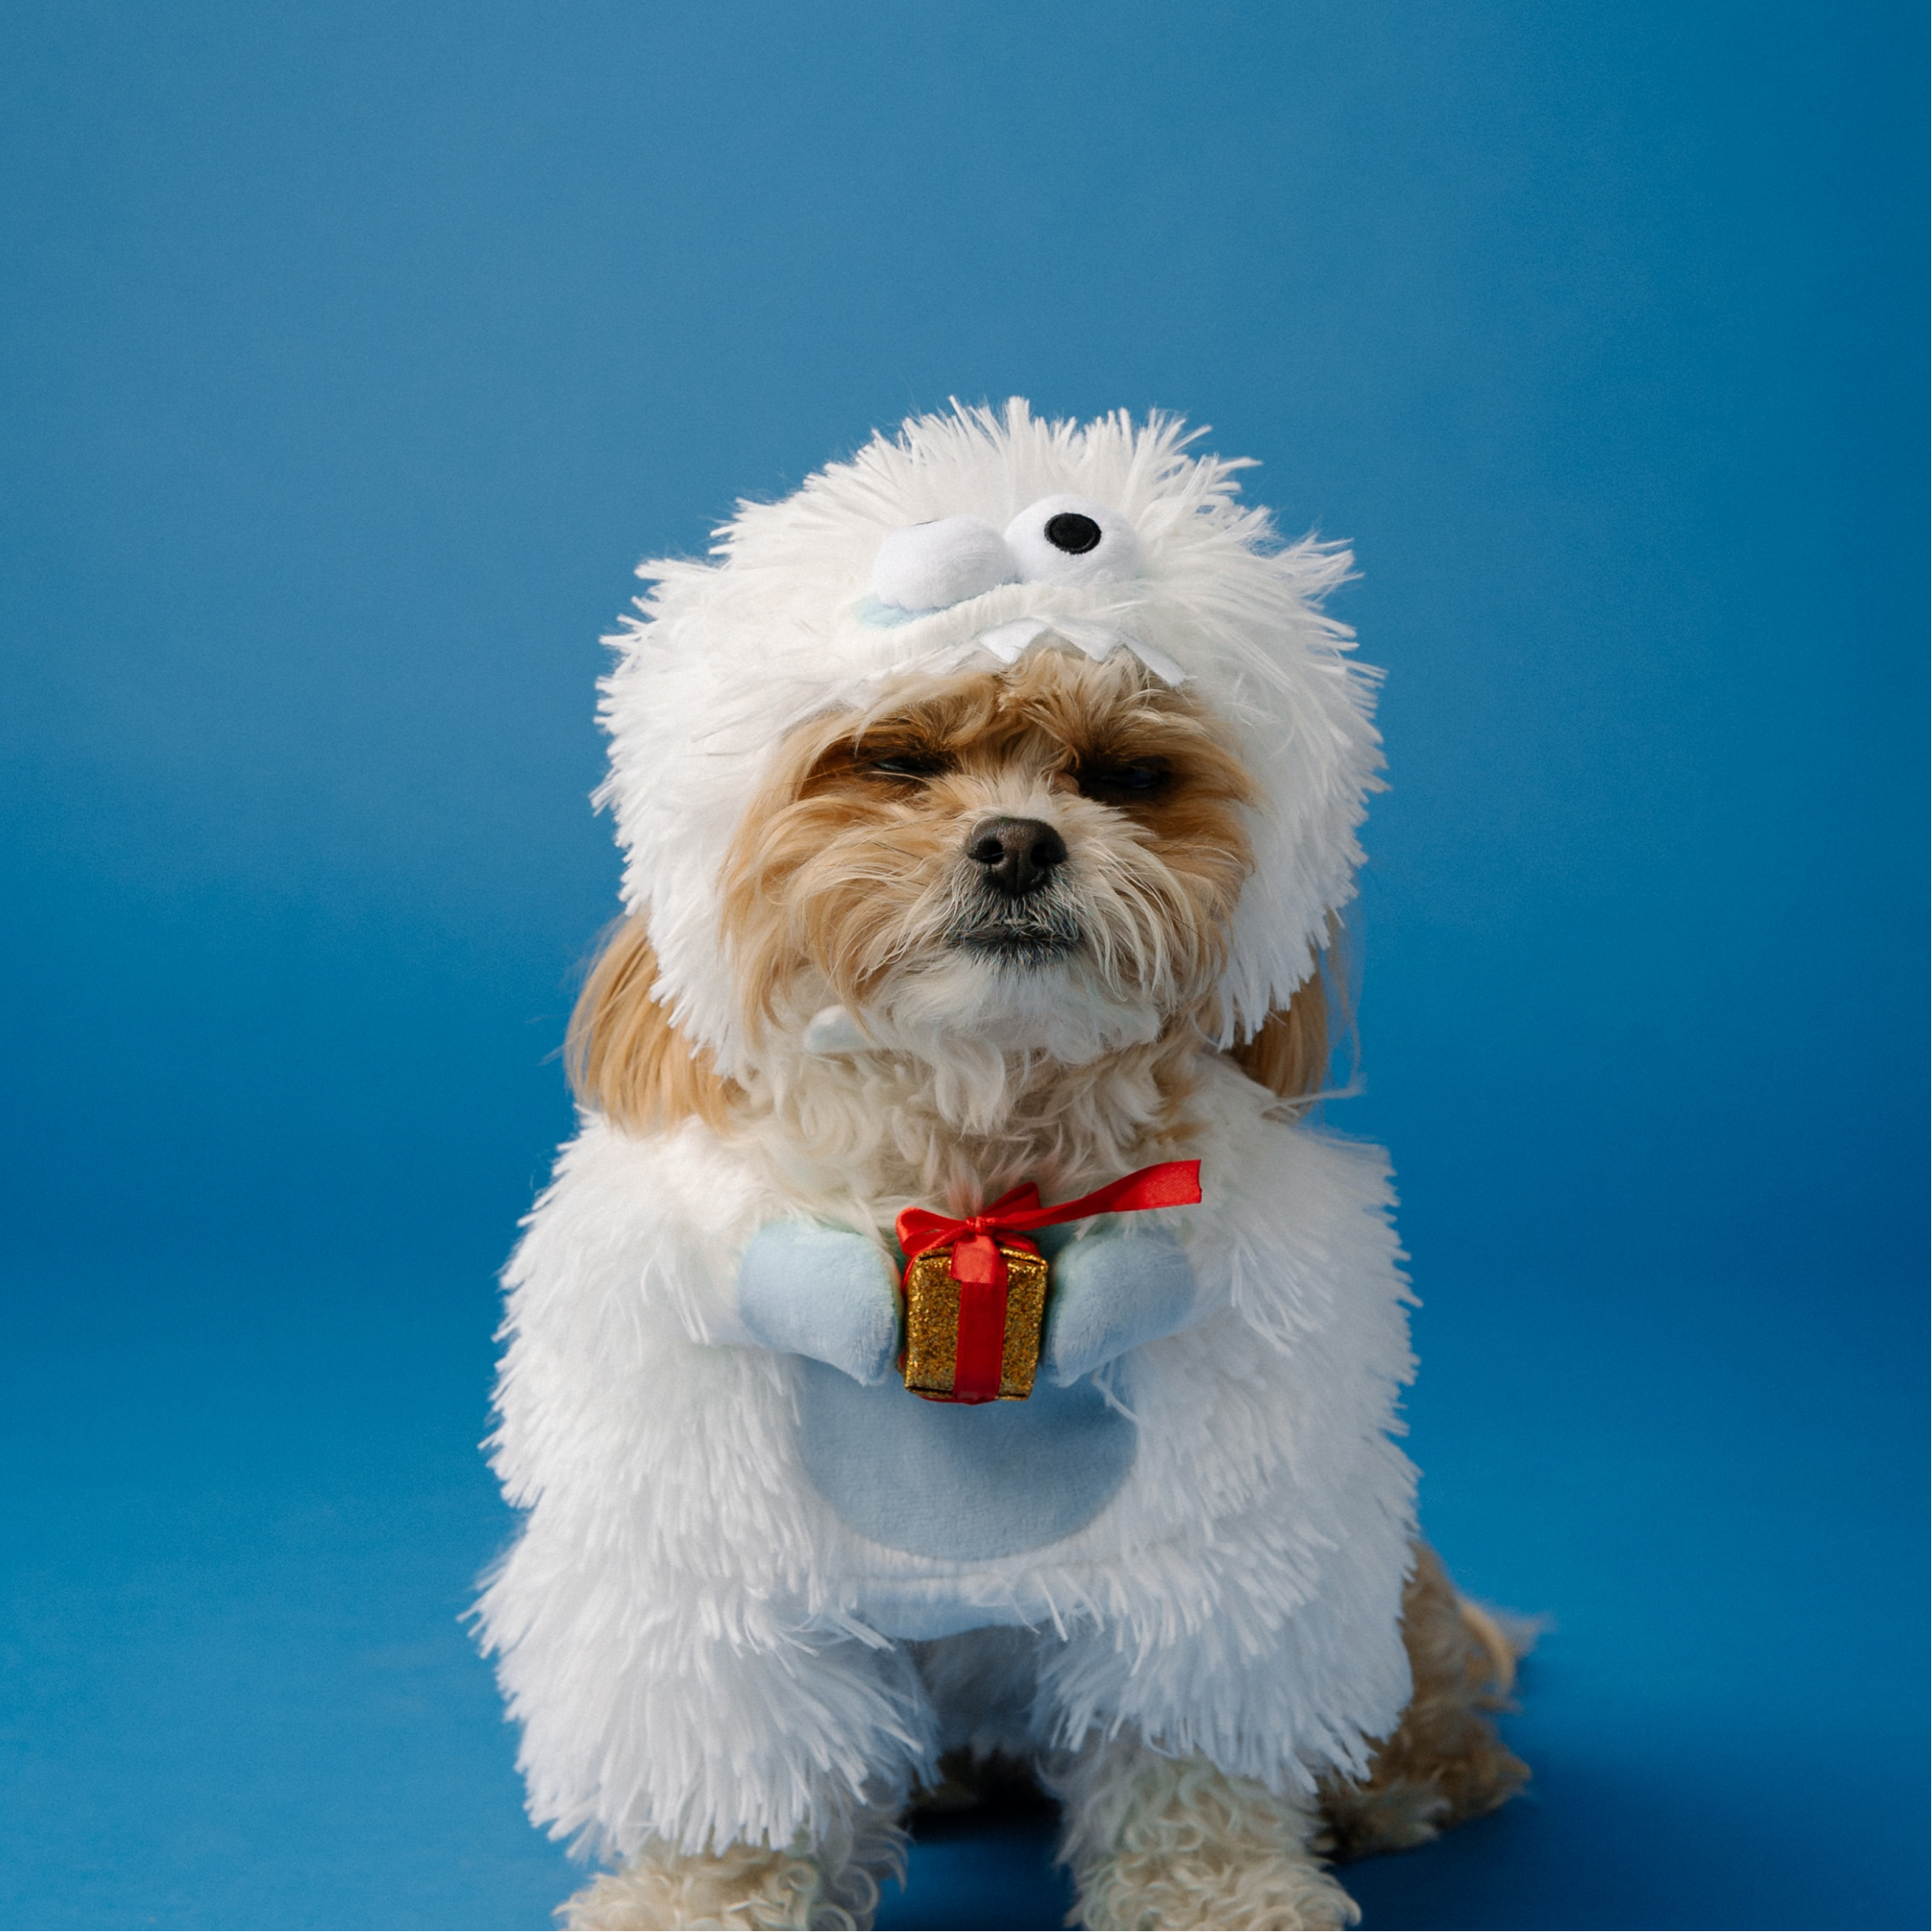 Portrait of a white dog in a costume on blue textile.